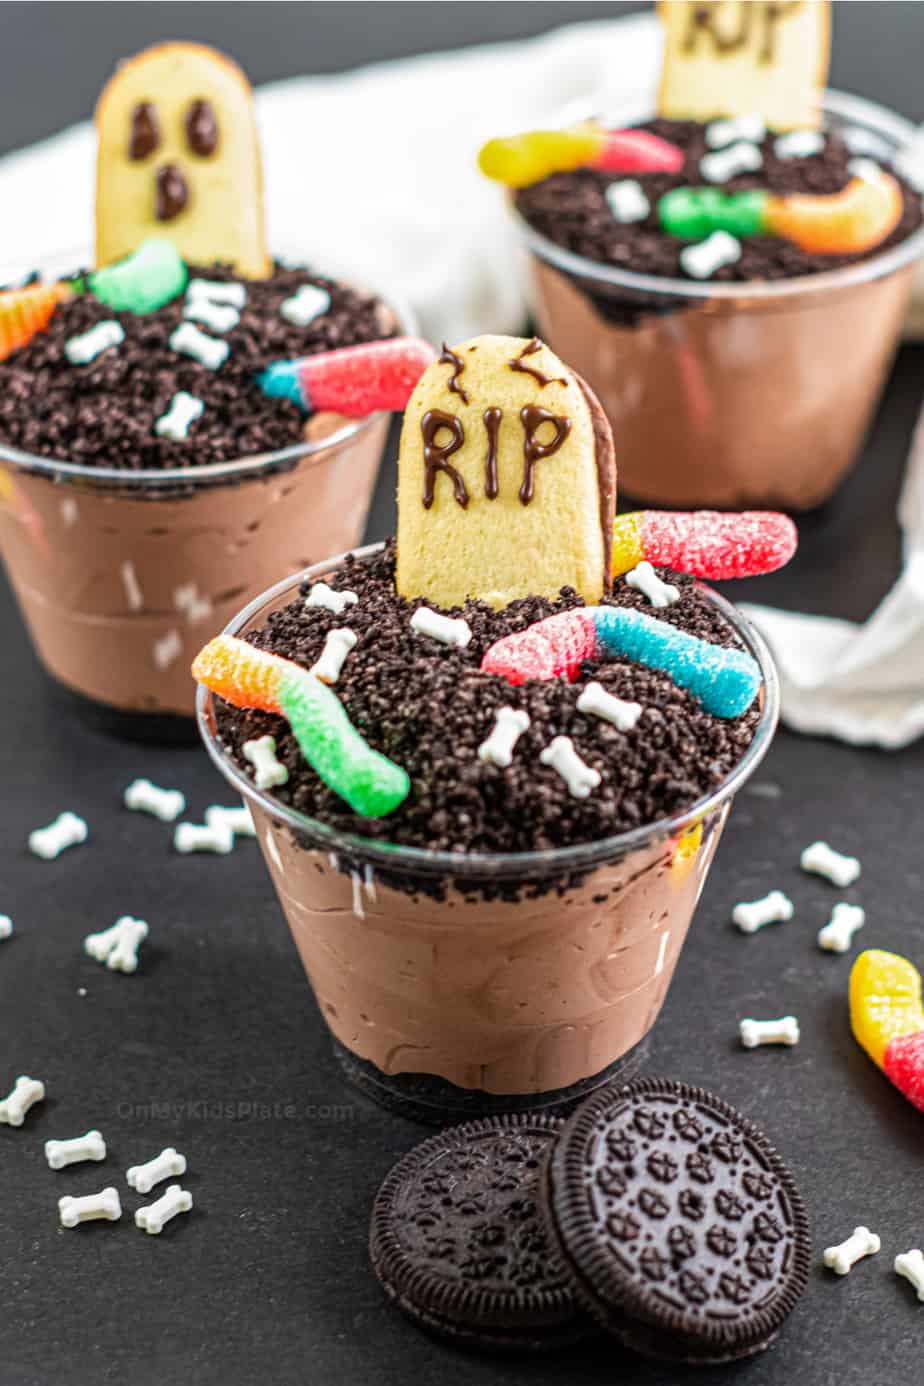 Three clear cups filled with pudding, topped with Oreo crumbs and tombstone and ghost shaped cookies.